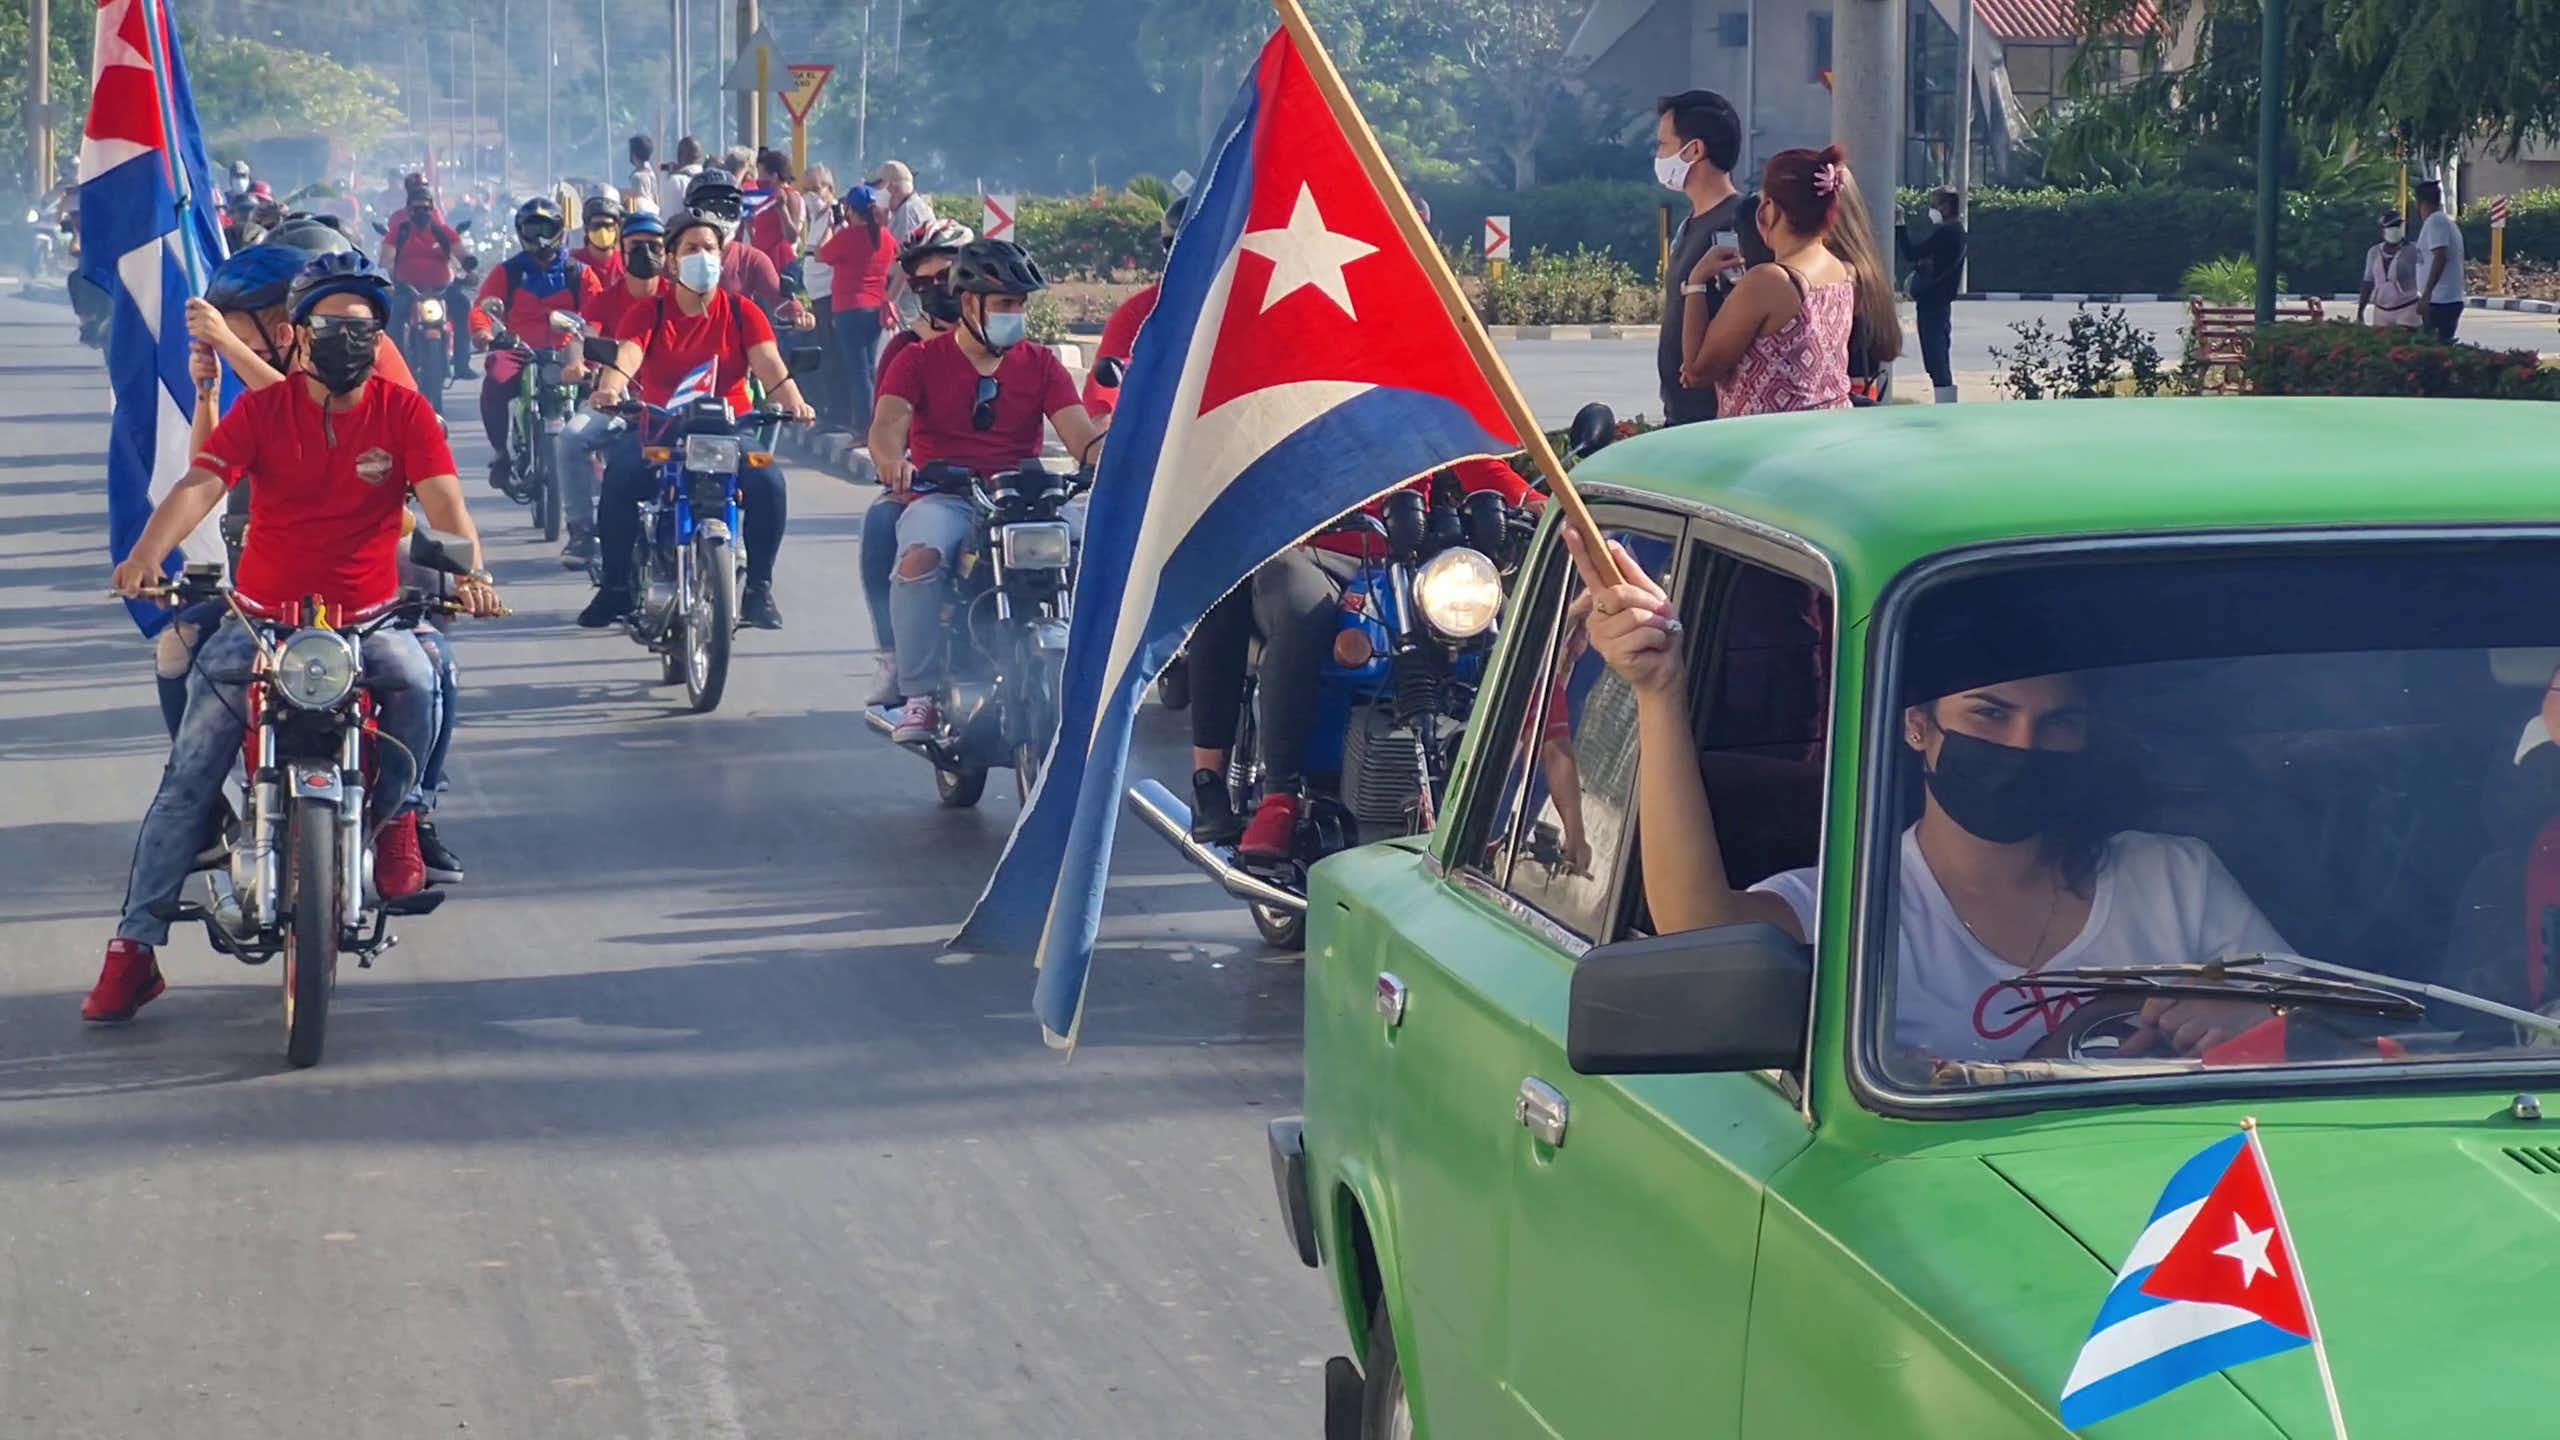 A man in a green car holding a Cuba flag aloft in front a line of motorcycles.